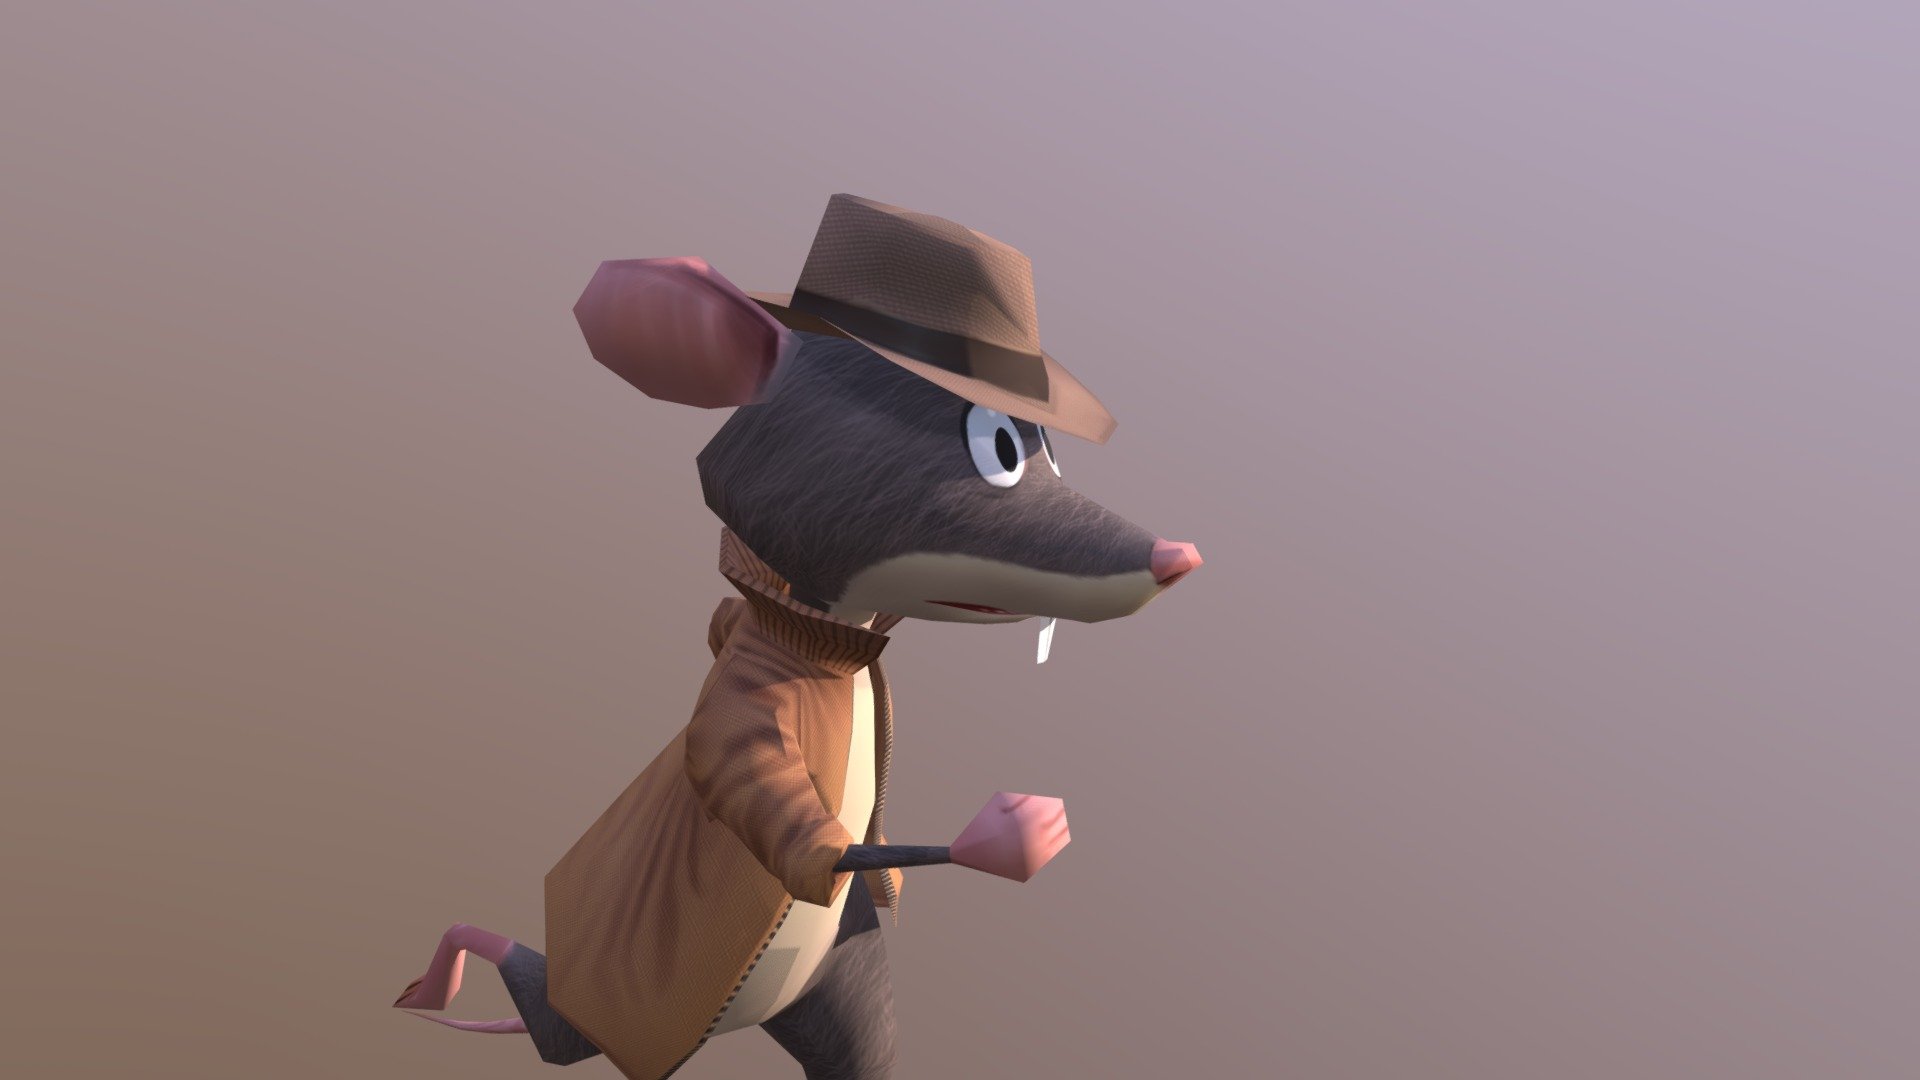 Animations for a Rat Character, includes running, idle a jump frame and a transition for when the jump ends&hellip; and of course a dance one xD. This character was used for the game Rat Trapped, made for the Ludum Dare 42 Challenge: https://gread.itch.io/rat-trapped-ld42

Model by: 
https://sketchfab.com/davedozer - Rat Character - Animations - 3D model by leomiranda518 3d model